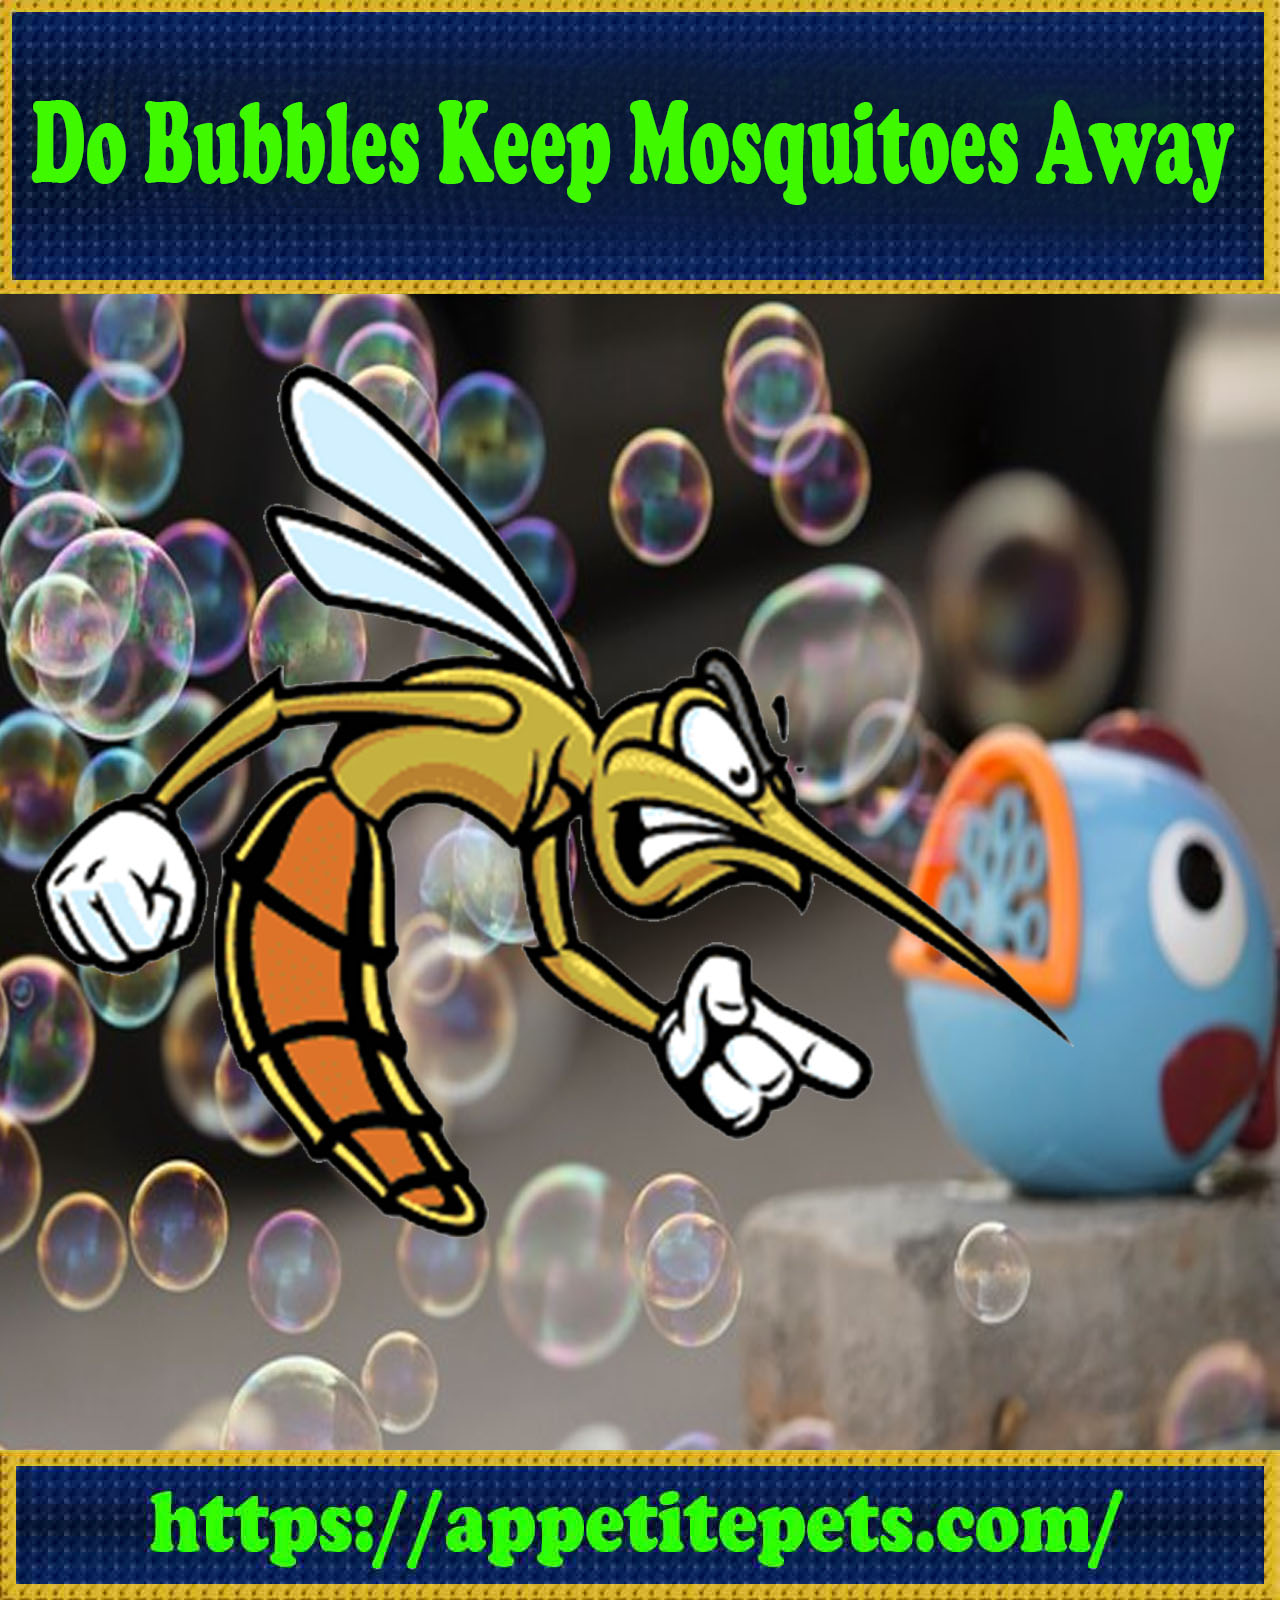 Do Bubbles Keep Mosquitoes Away?